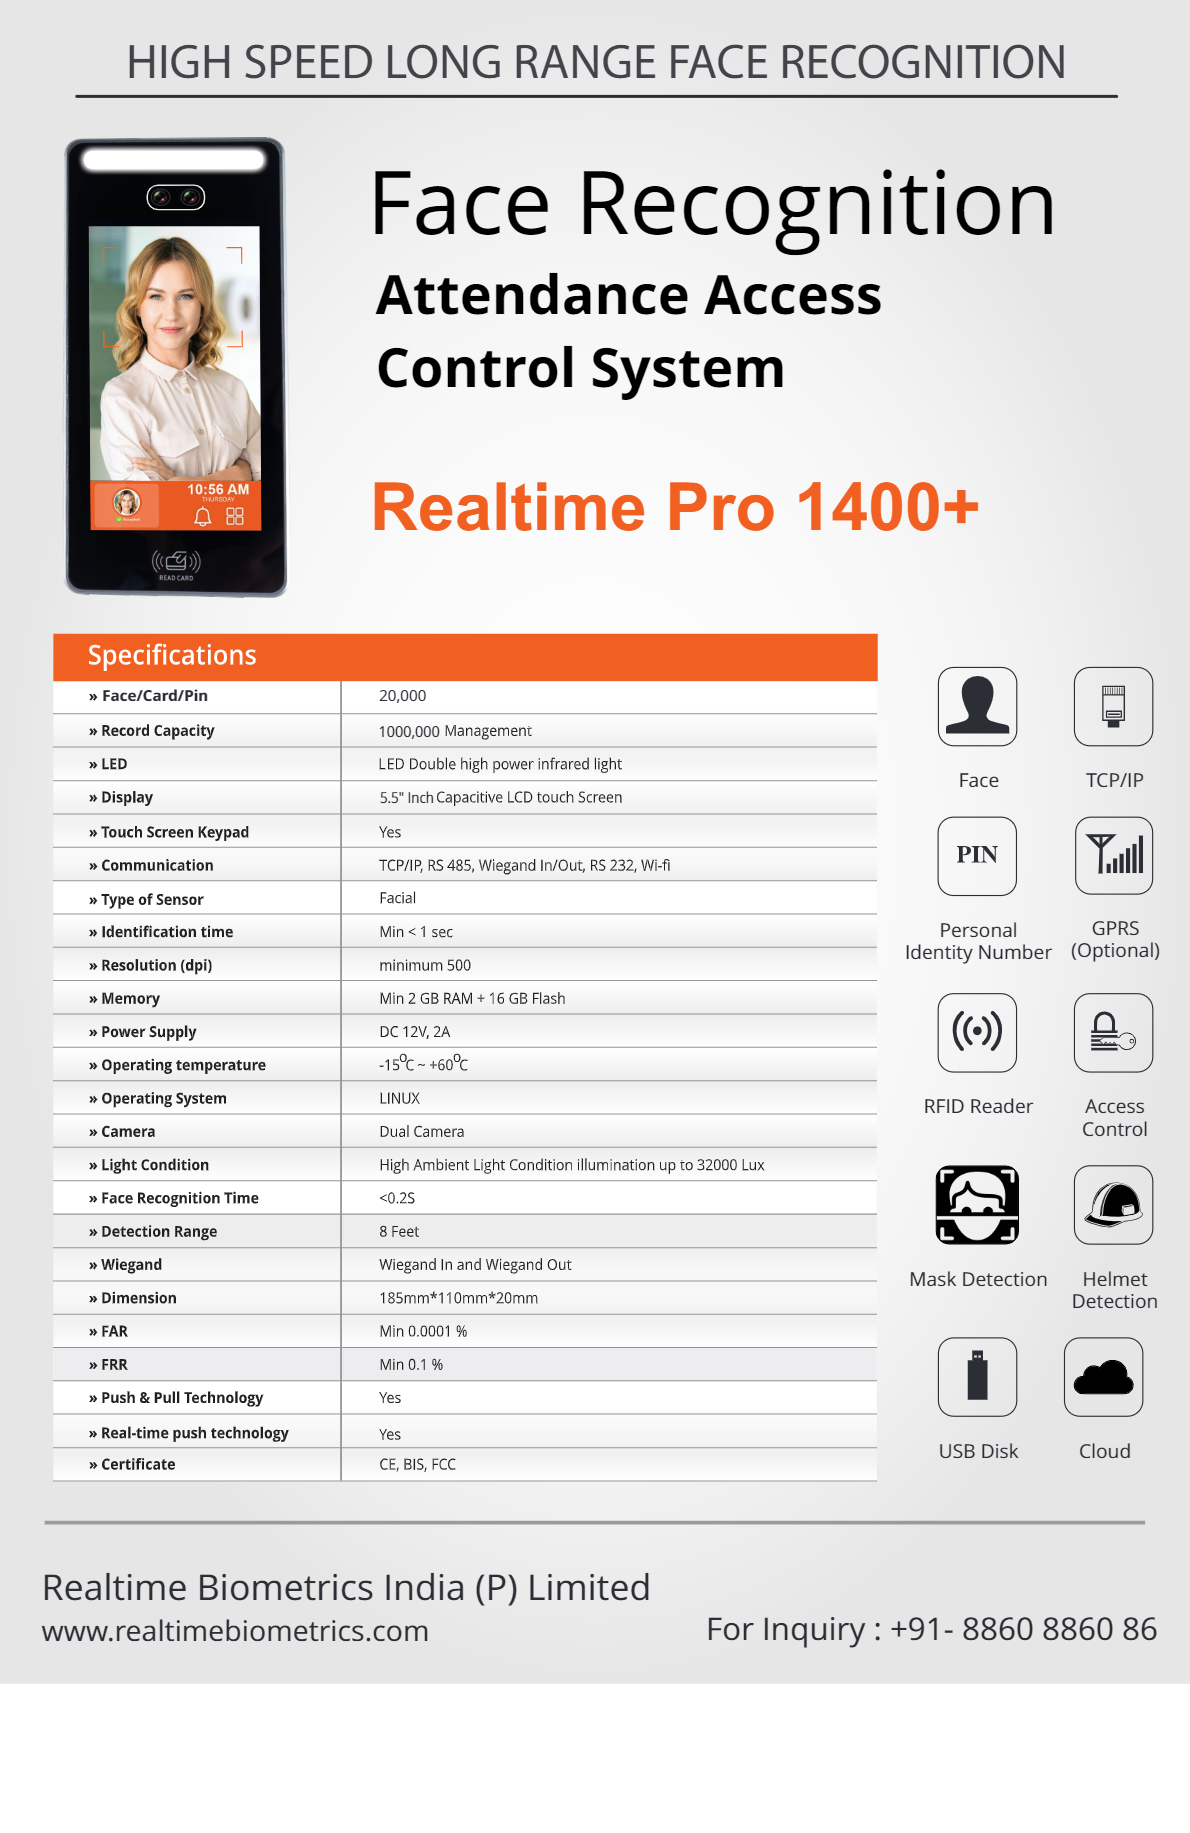 Realtime Pro 1400+ Face Recognition Attendance Access Control System